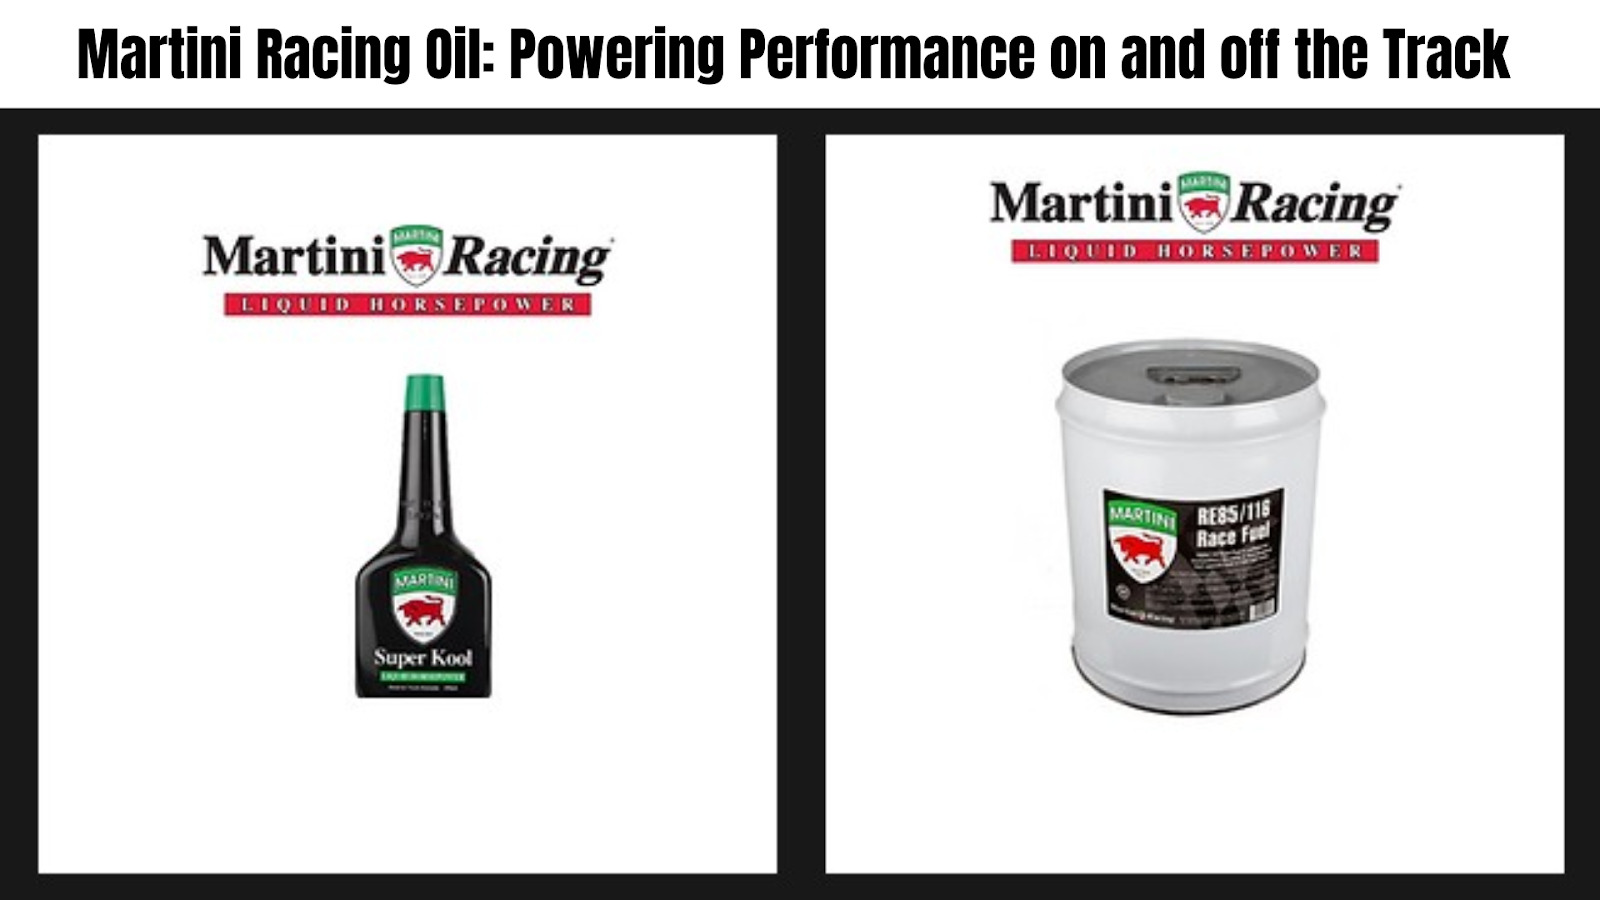 Martini Racing Oil: Powering Performance on and off the Track